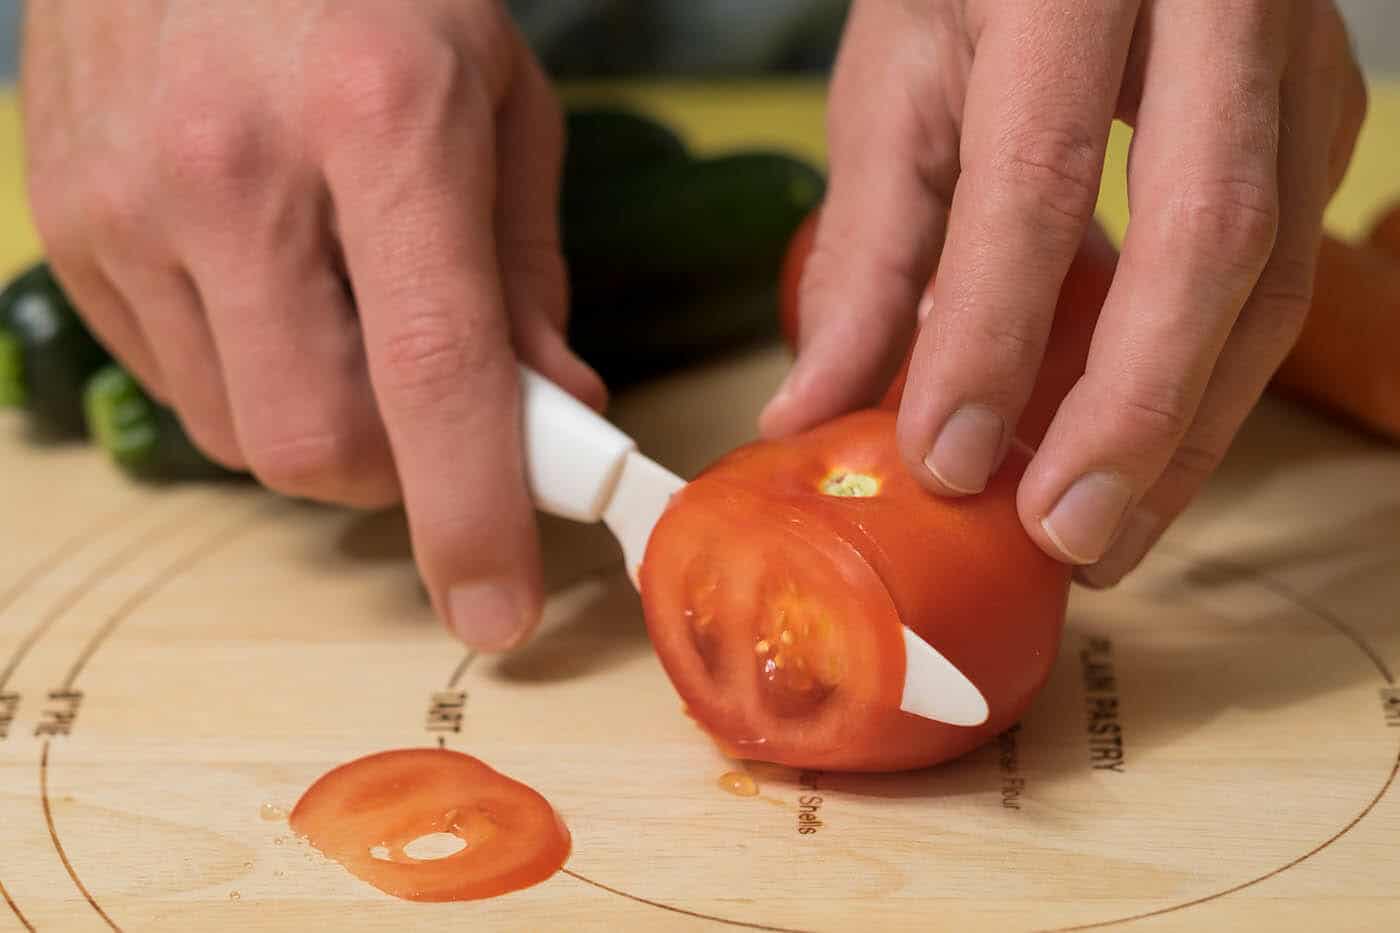 Slicing through a tomato was no problem for the Kyocera paring knife.